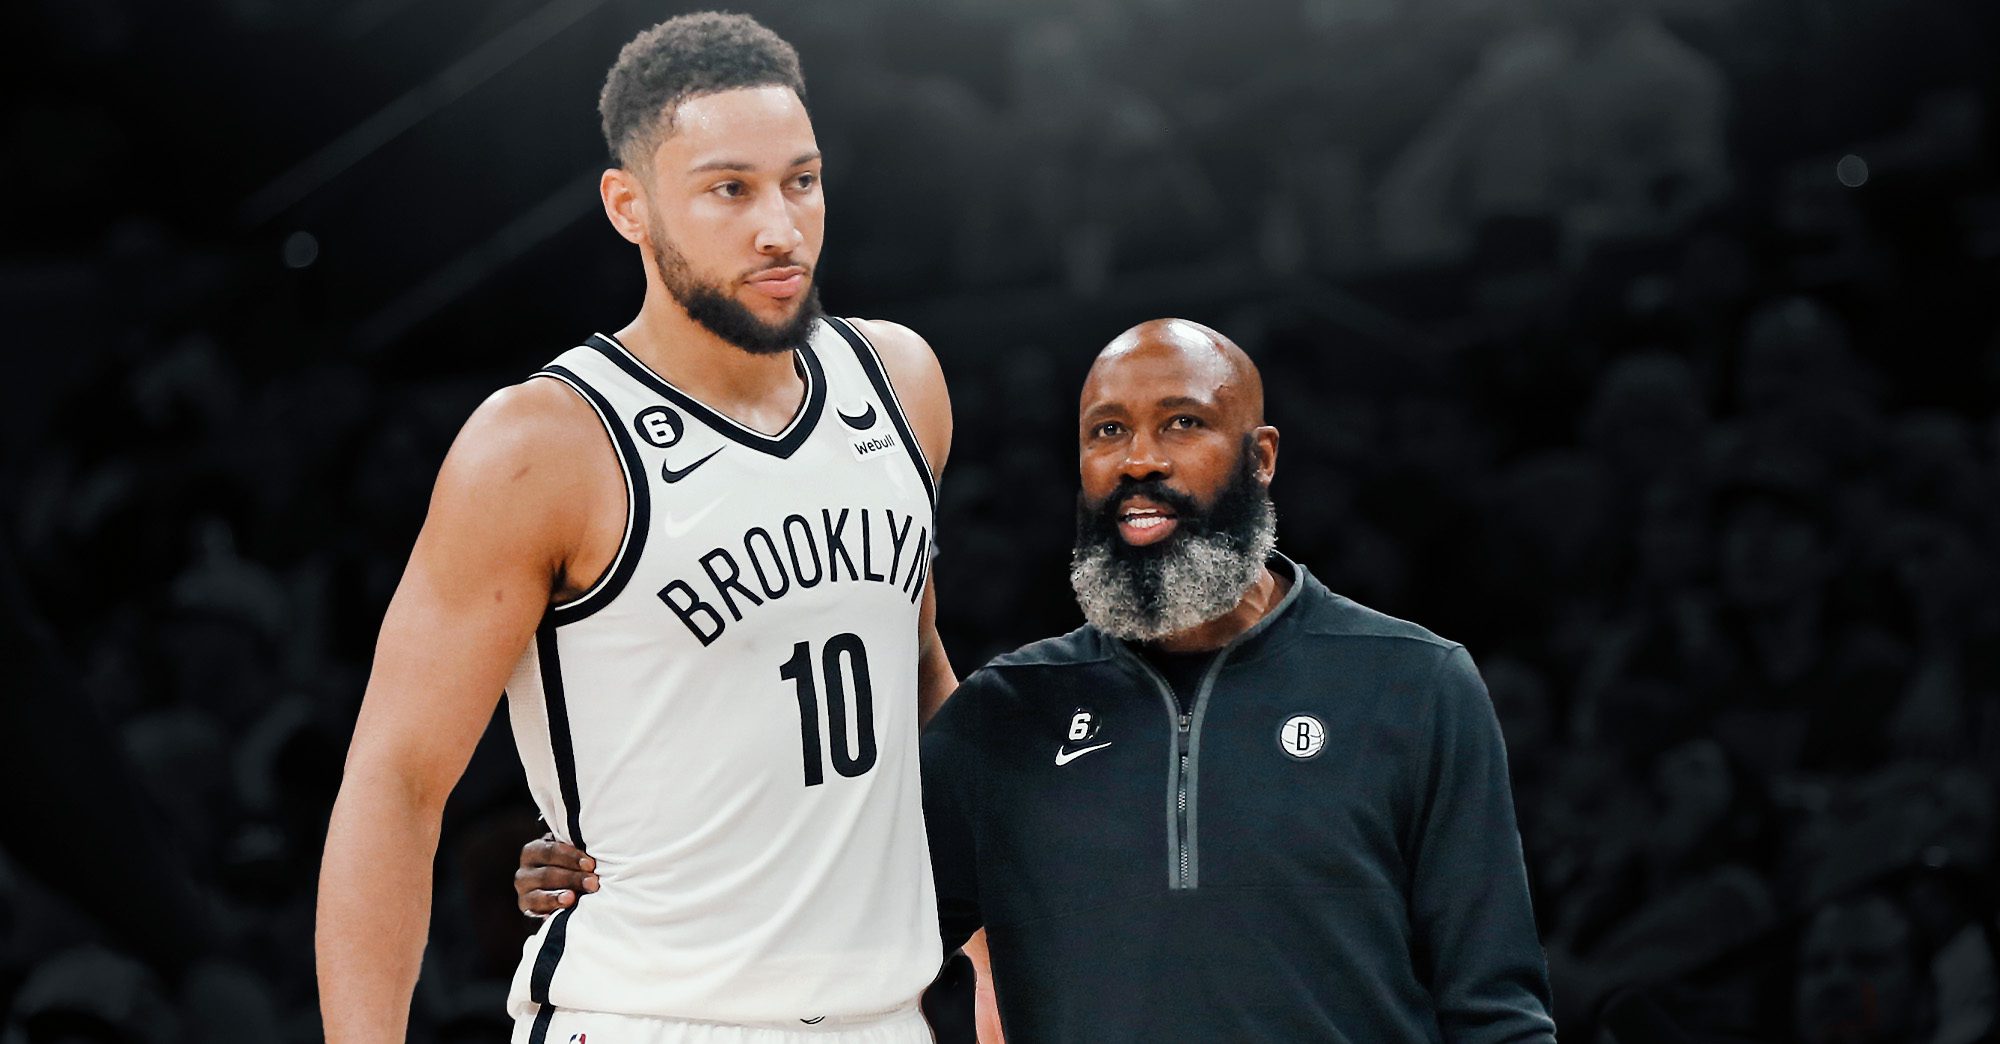 Inside Why the Nets Fired Head Coach Jacques Vaughn